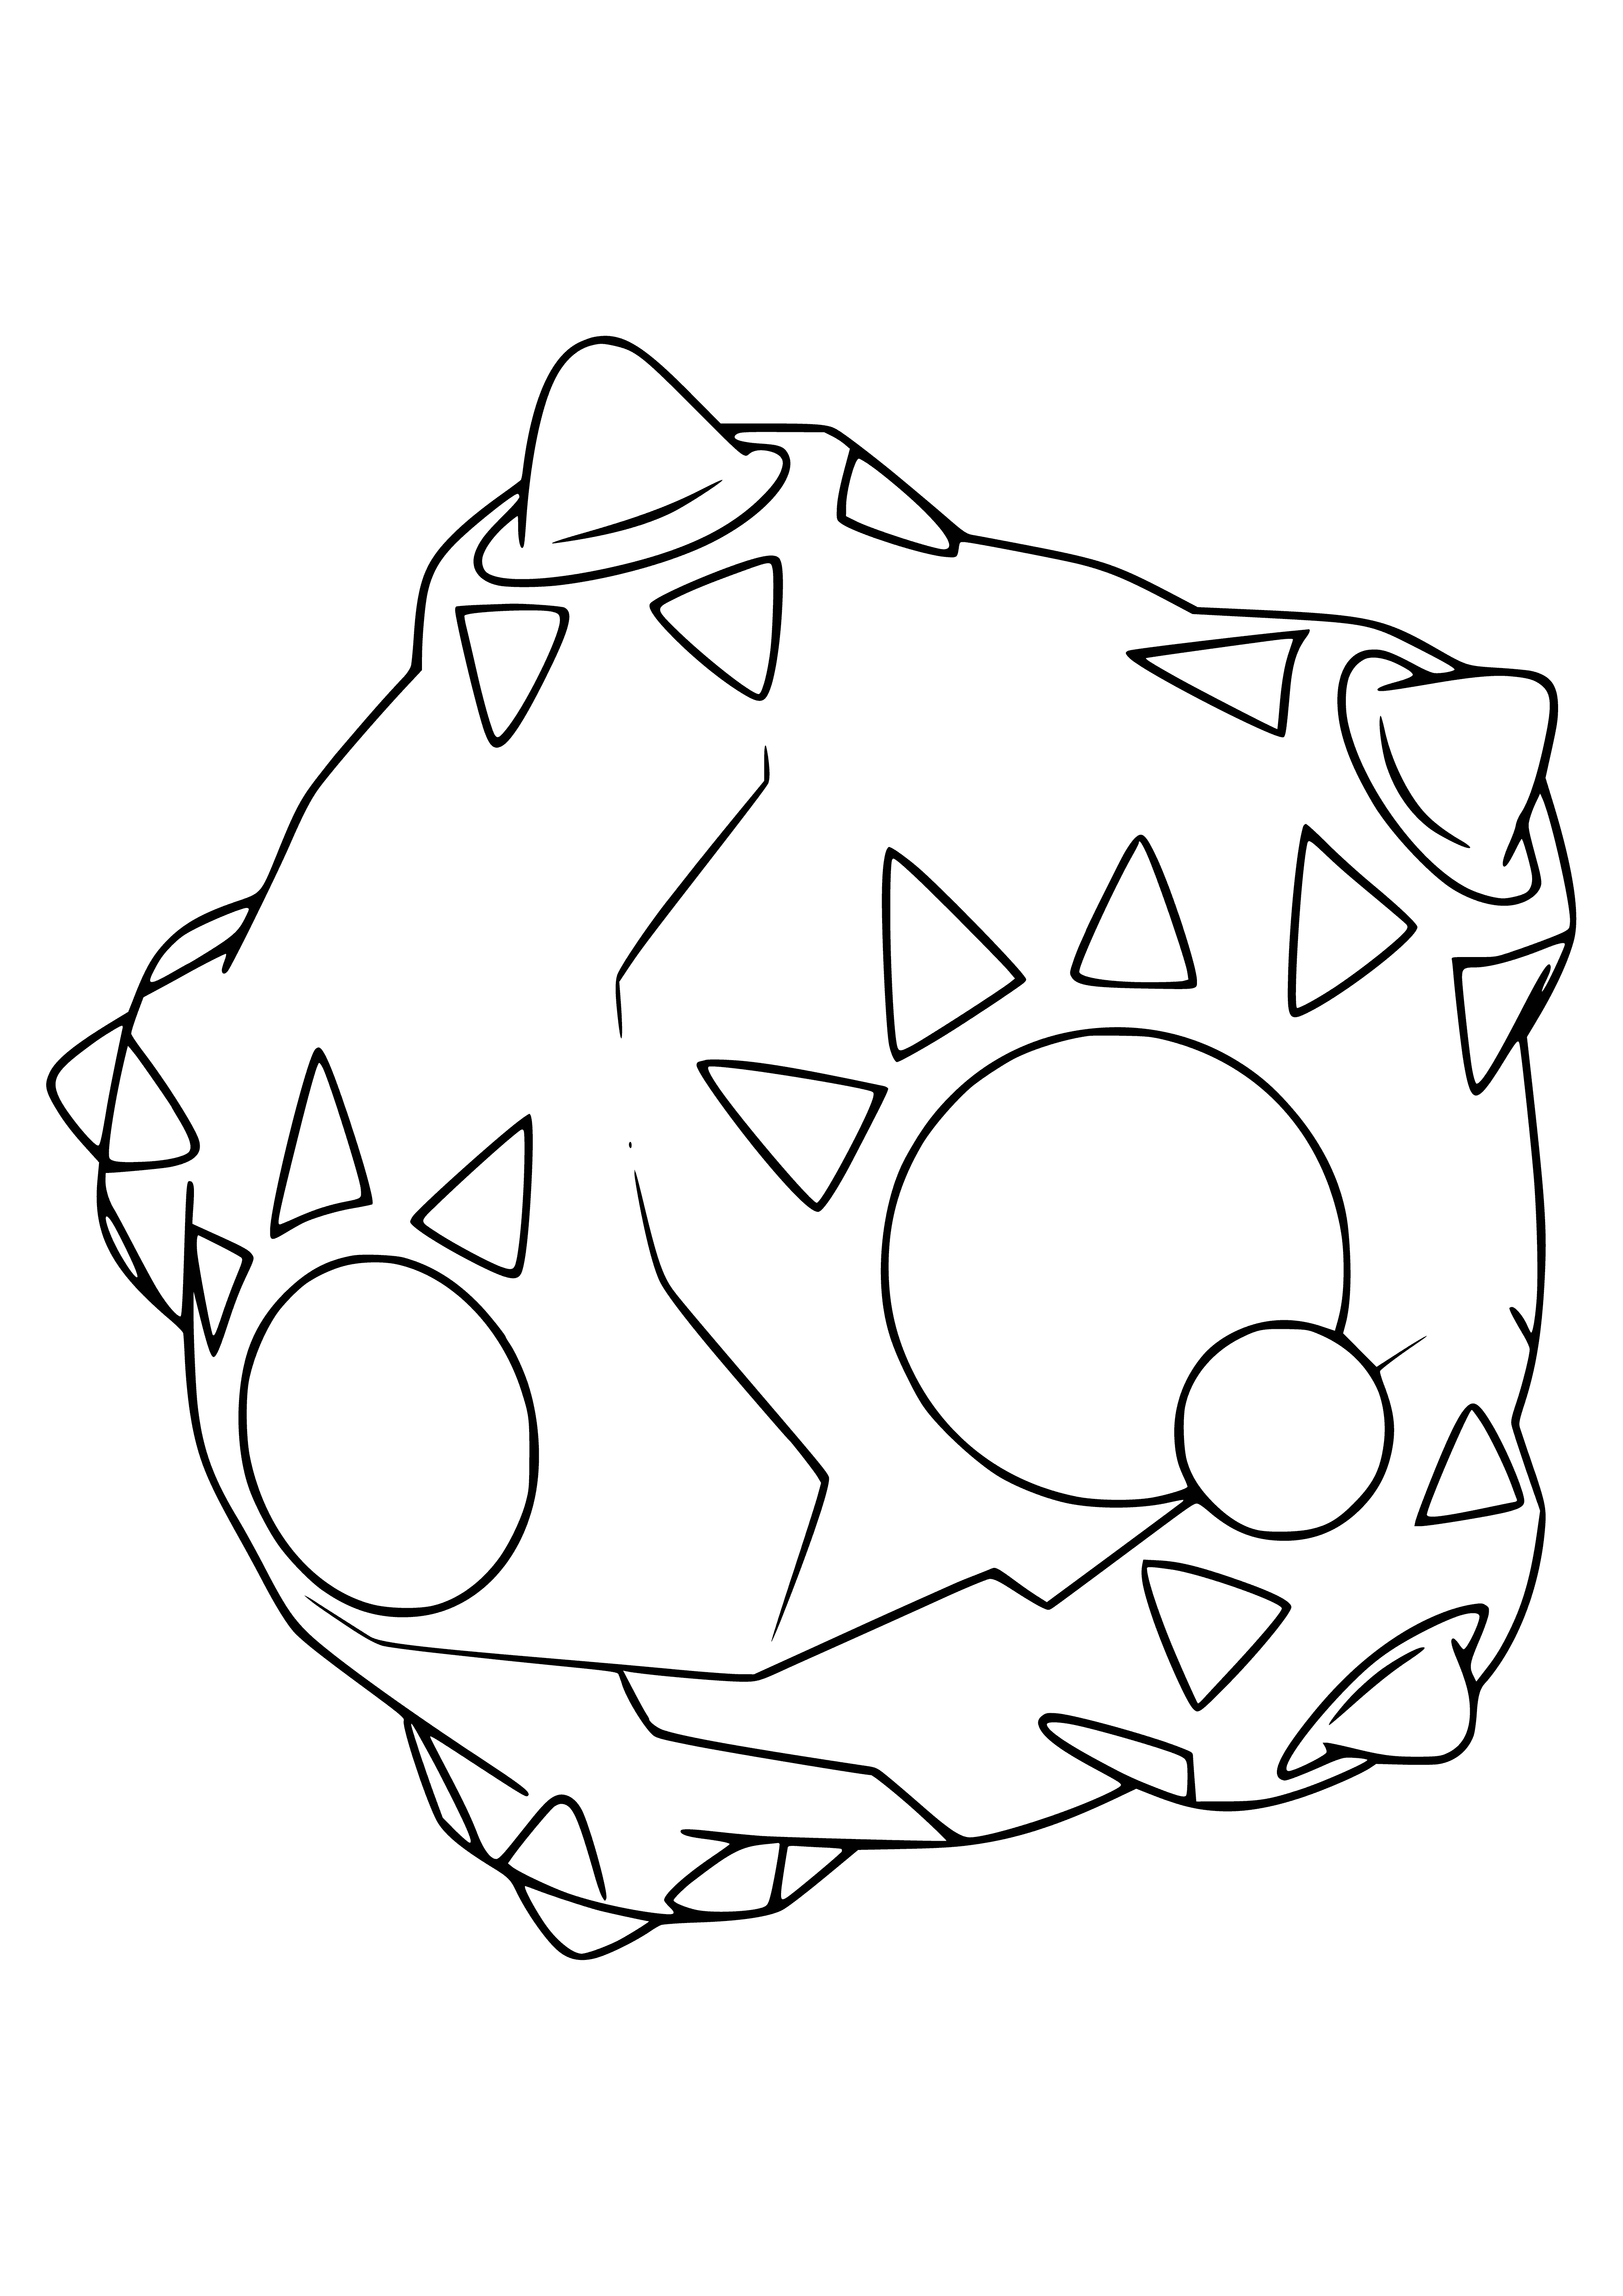 coloring page: Small, disc-shaped Pokemon w/ dark & light blue halves & white star in center. Tiny face w/ big, black eyes.